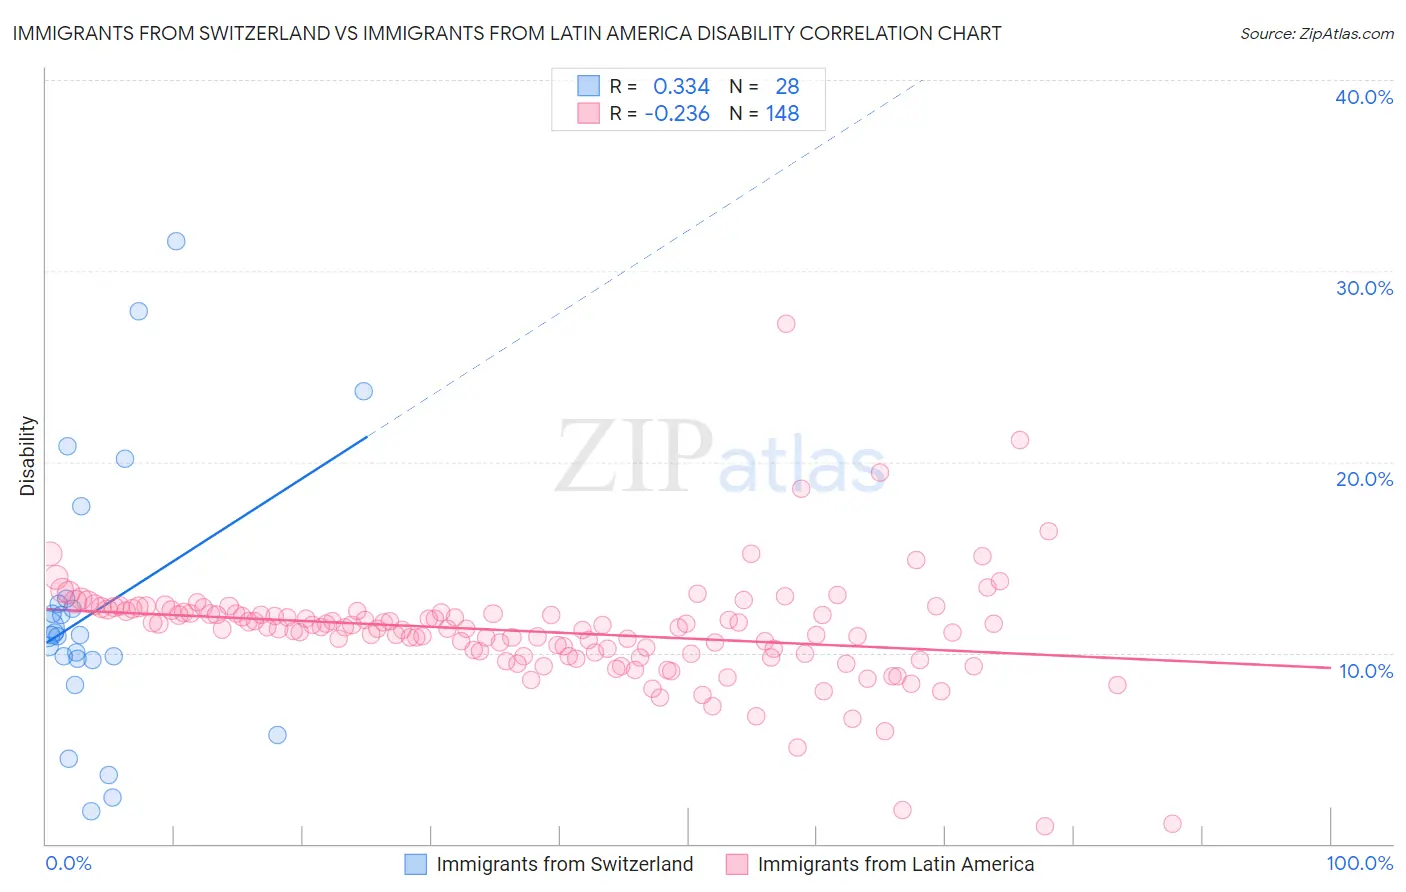 Immigrants from Switzerland vs Immigrants from Latin America Disability